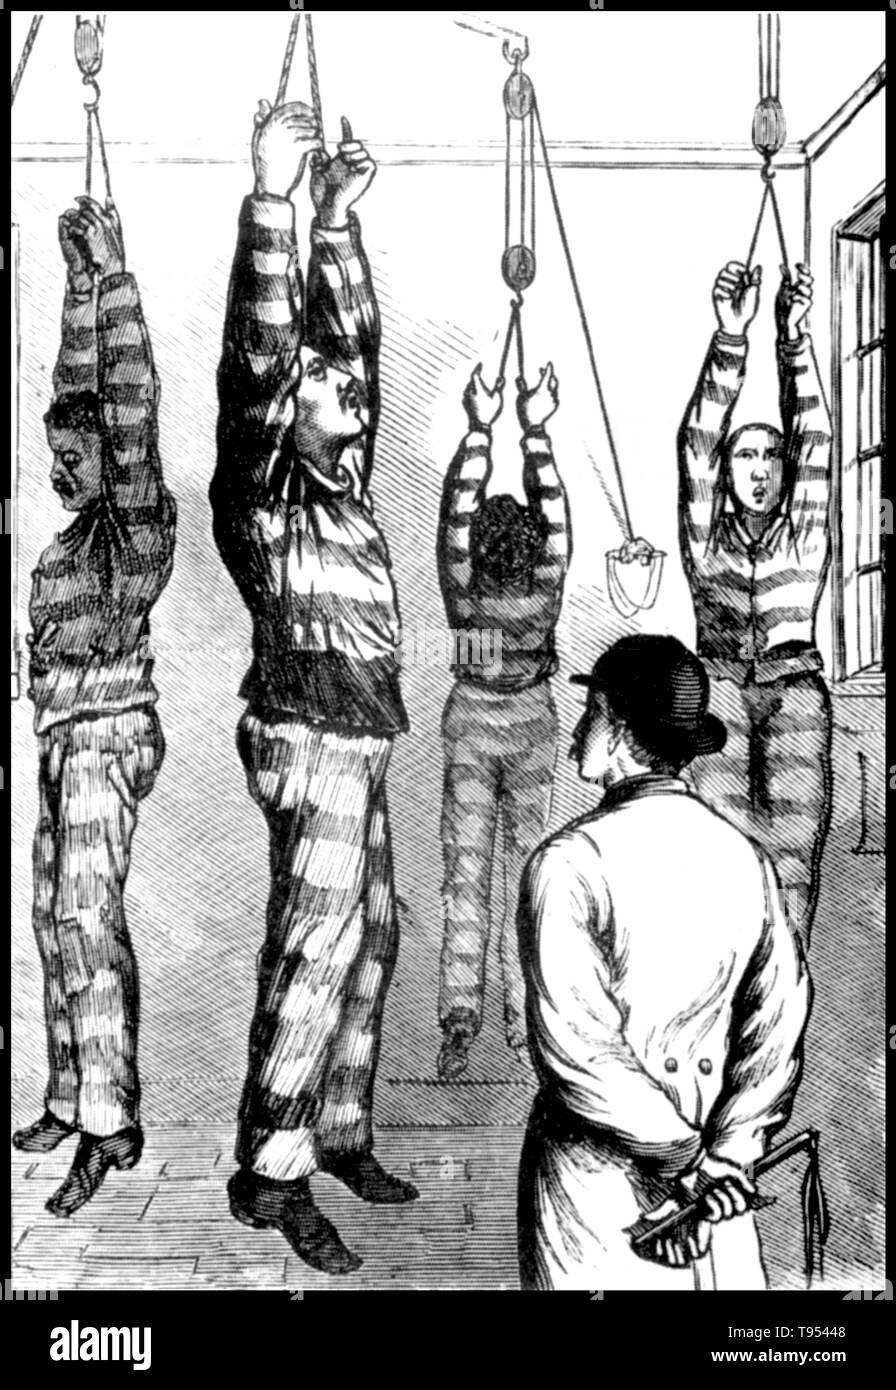 Hanging by thumbs, 'the trapeze', means, quite simply, being suspended from just your thumbs. It was used to deal with difficult prisoners, including those who tried to escape. After being suspended like that for a long time, thumbs became deformed and hands disabled. They would then be unable to fulfill their labor duties, making them subject to more punishment. Unknown source, 1871. Stock Photo